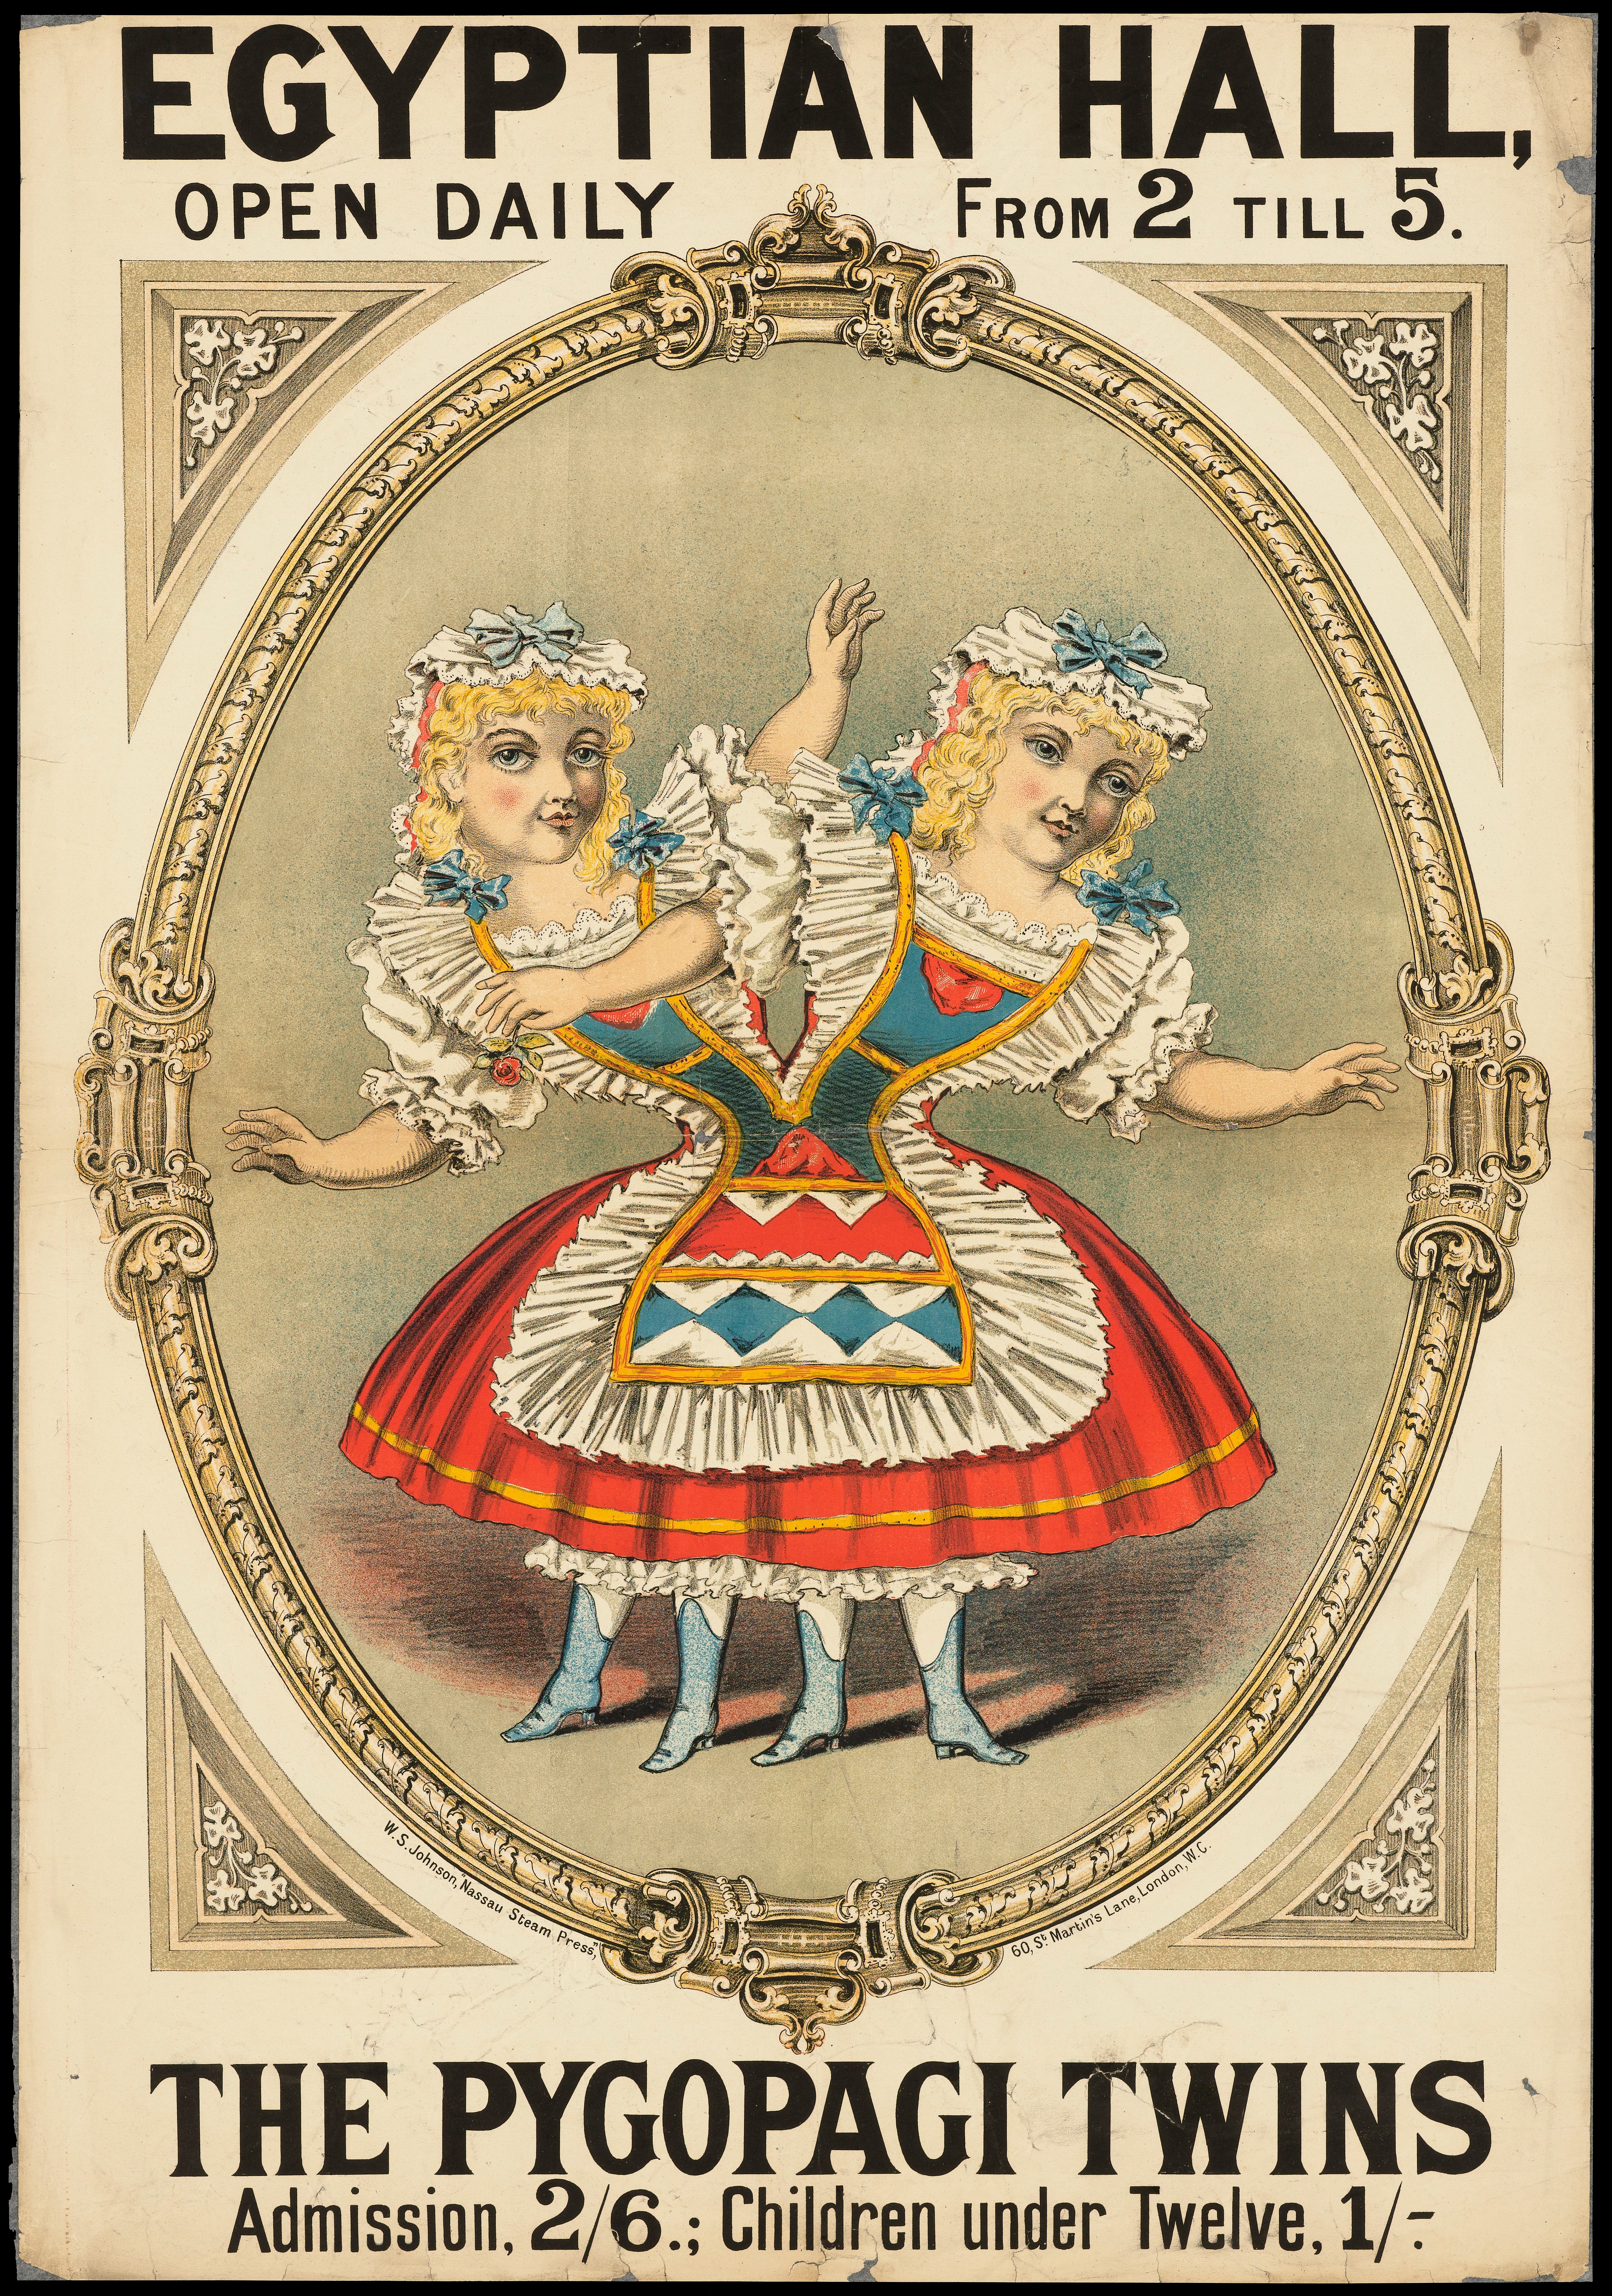 Poster for the Egyptian Hall advertising an act by conjoined twins